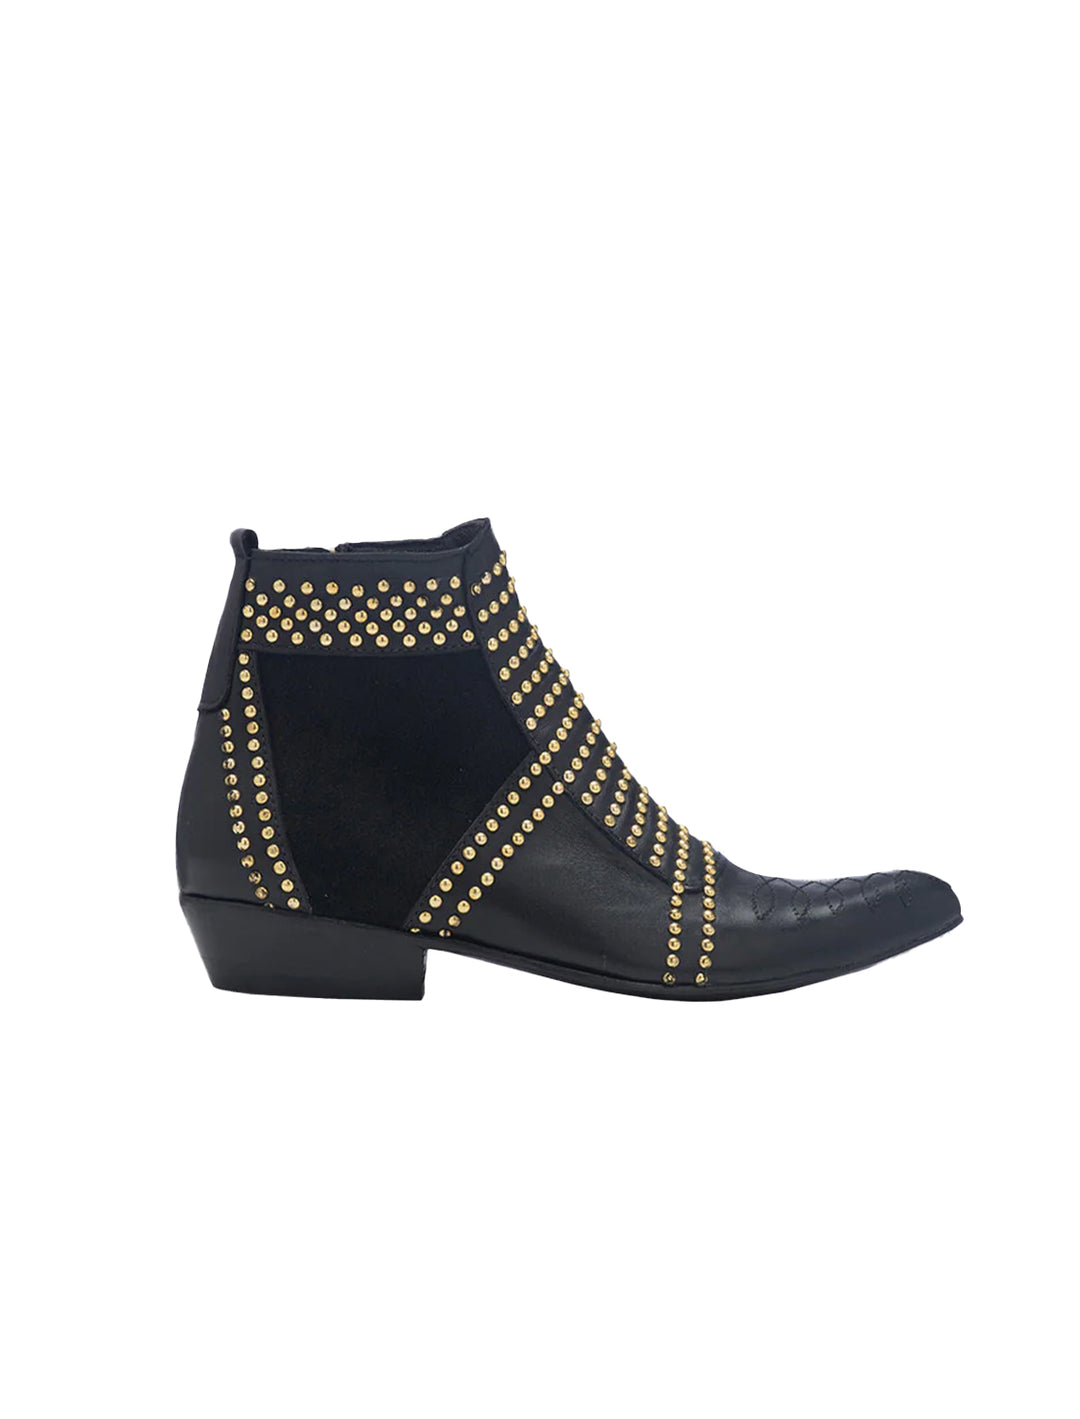 Side view of Anine Bing's charlie boots with gold studs.